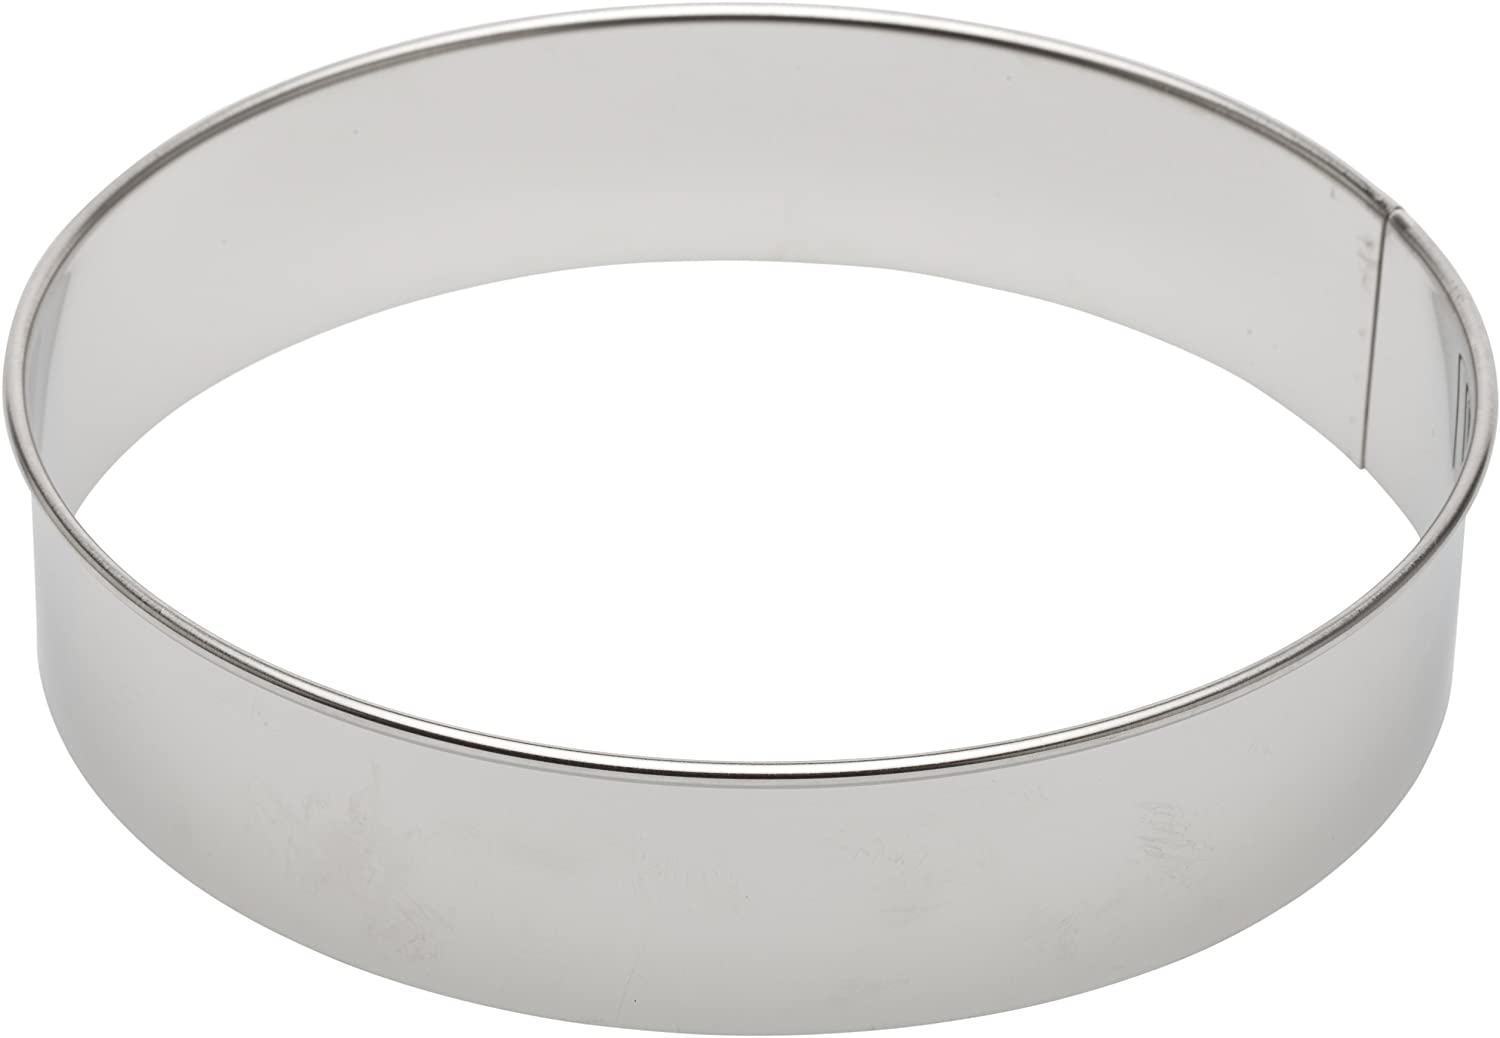 Ateco Food Cutter, 8" Round, Silver